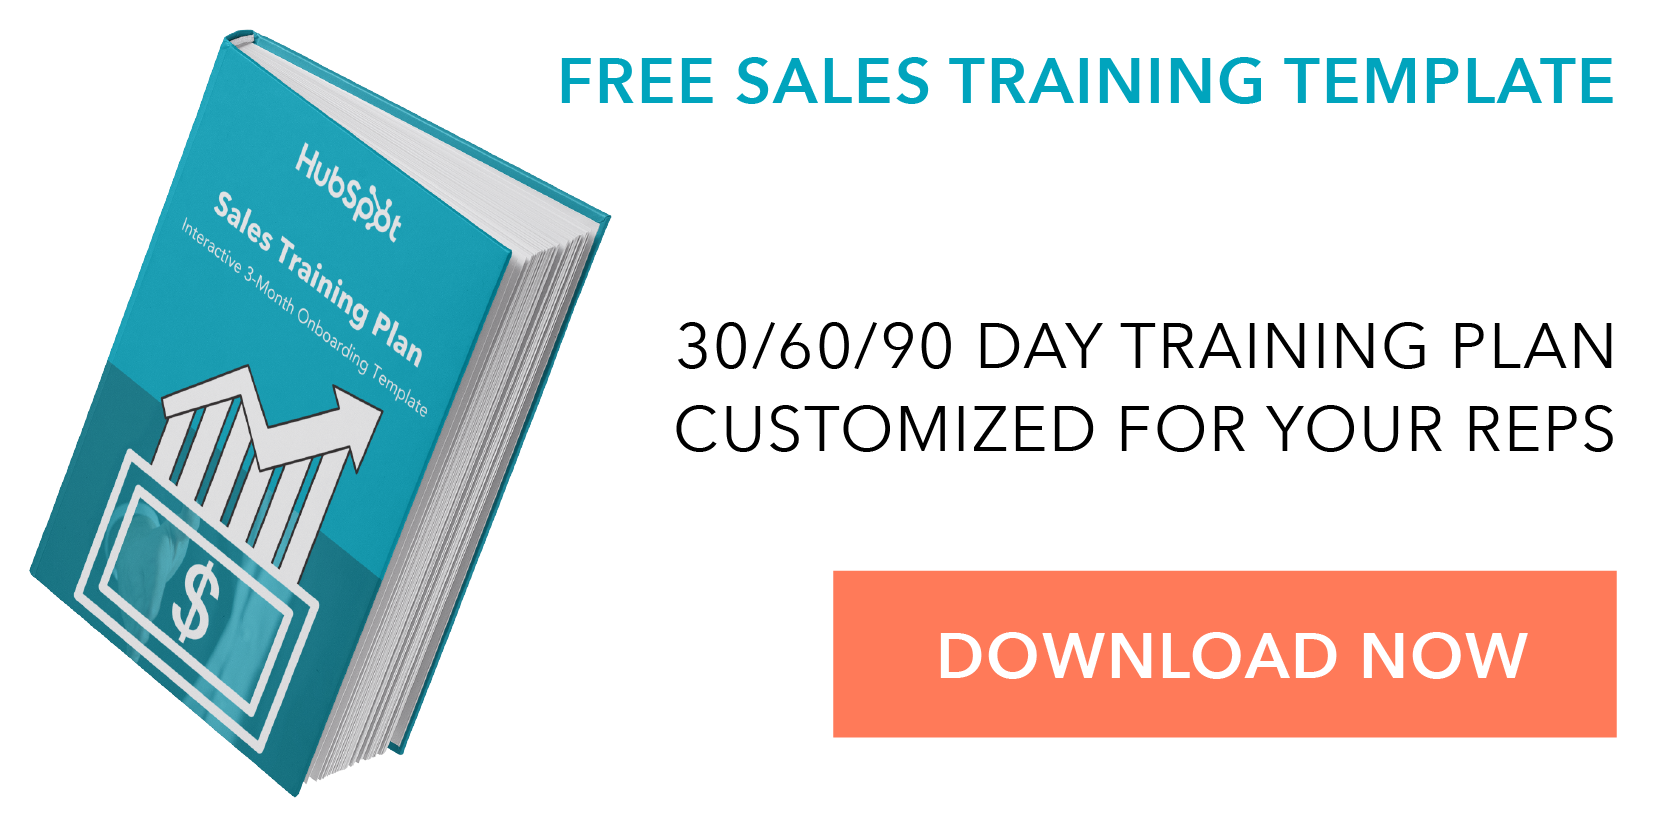 The 30 60 90 Day Plan Your Guide For Mastering A New Job Template Example